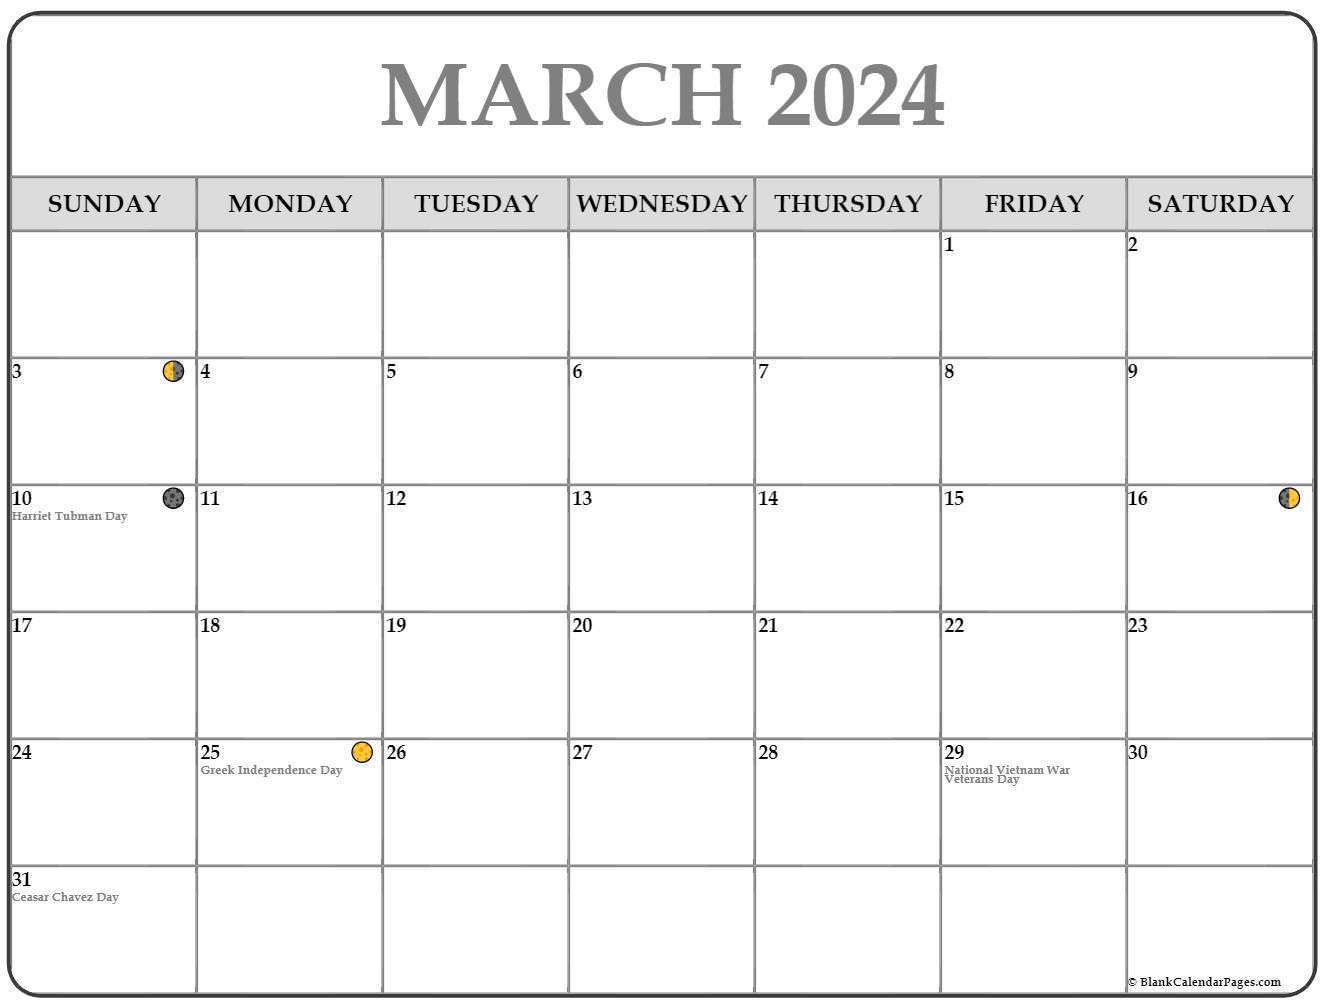 March 2020 calendar | free printable monthly calendars1767 x 1333